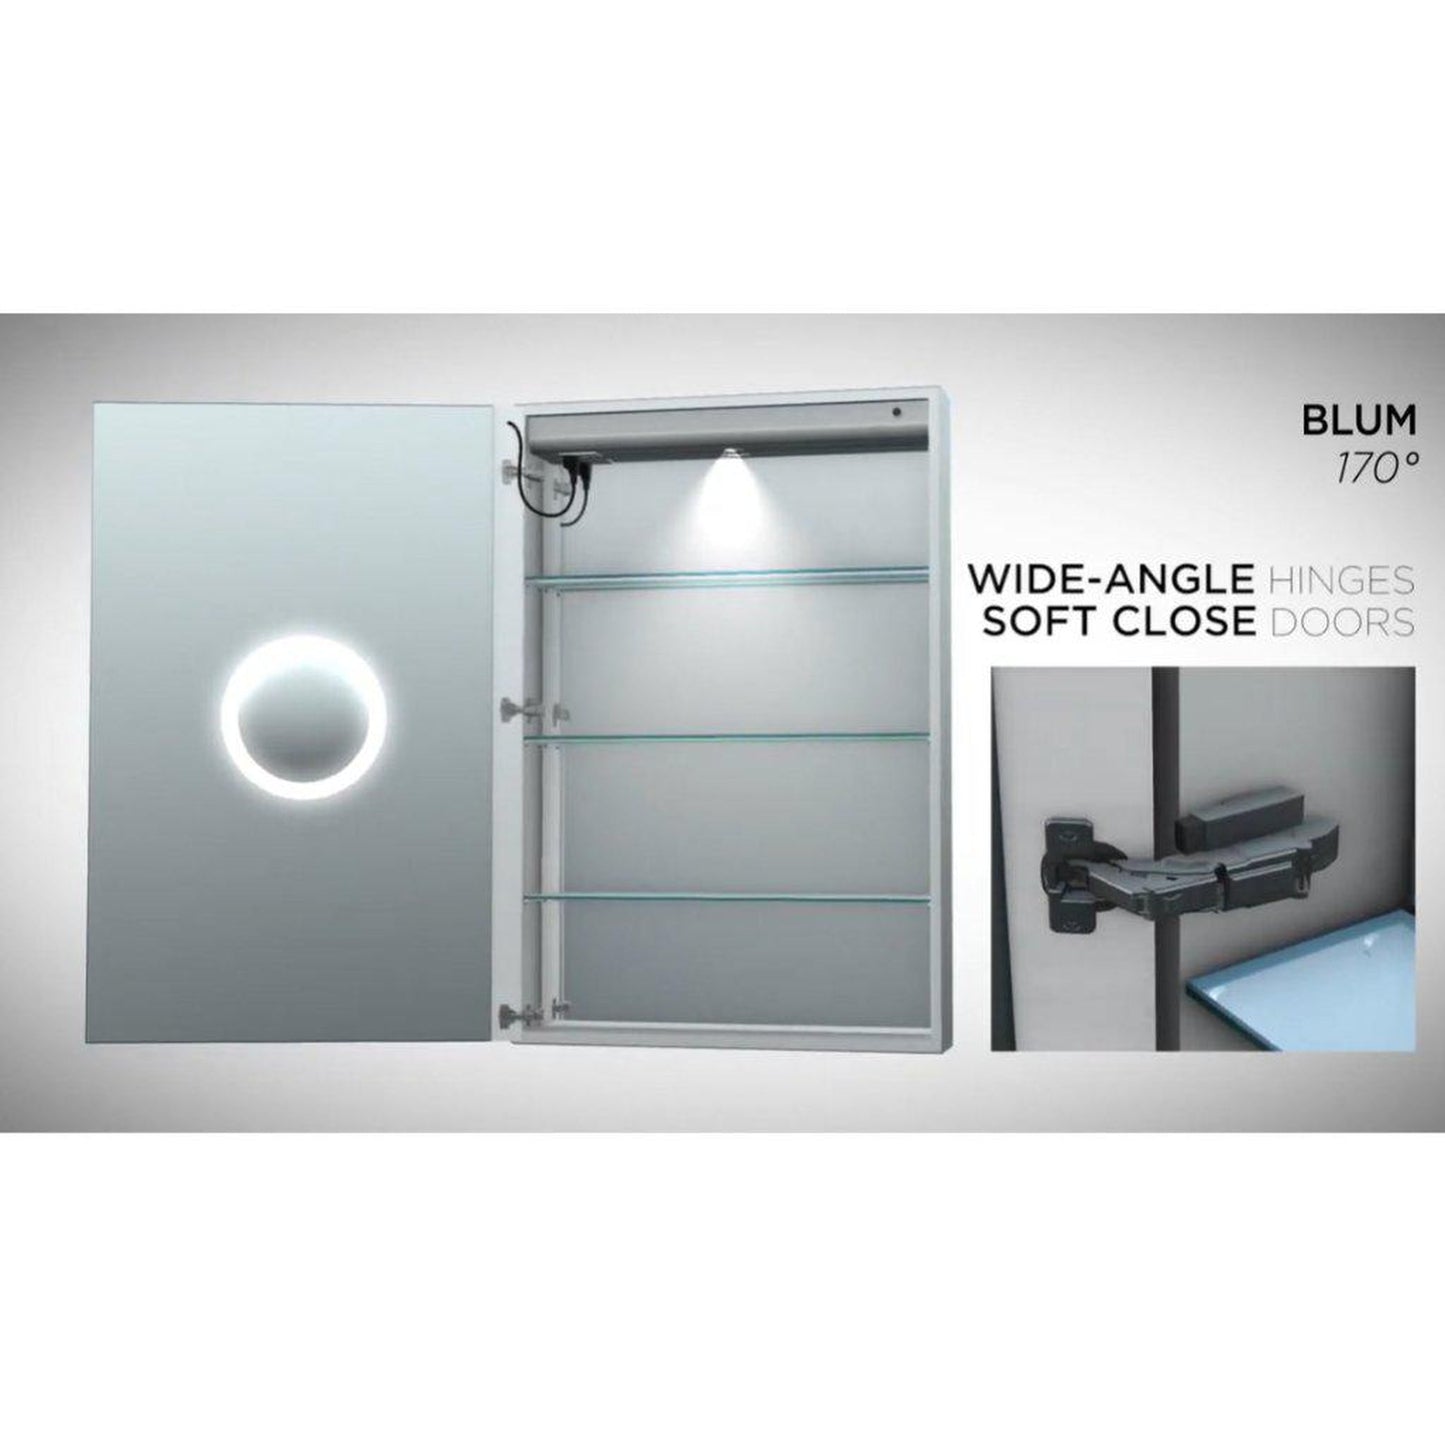 Krugg Reflections Svange 48" x 42" 5000K Single Tri-View Left-Right-Right Opening Recessed/Surface-Mount Illuminated Silver Backed LED Medicine Cabinet Mirror With Built-in Defogger, Dimmer and Electrical Outlet